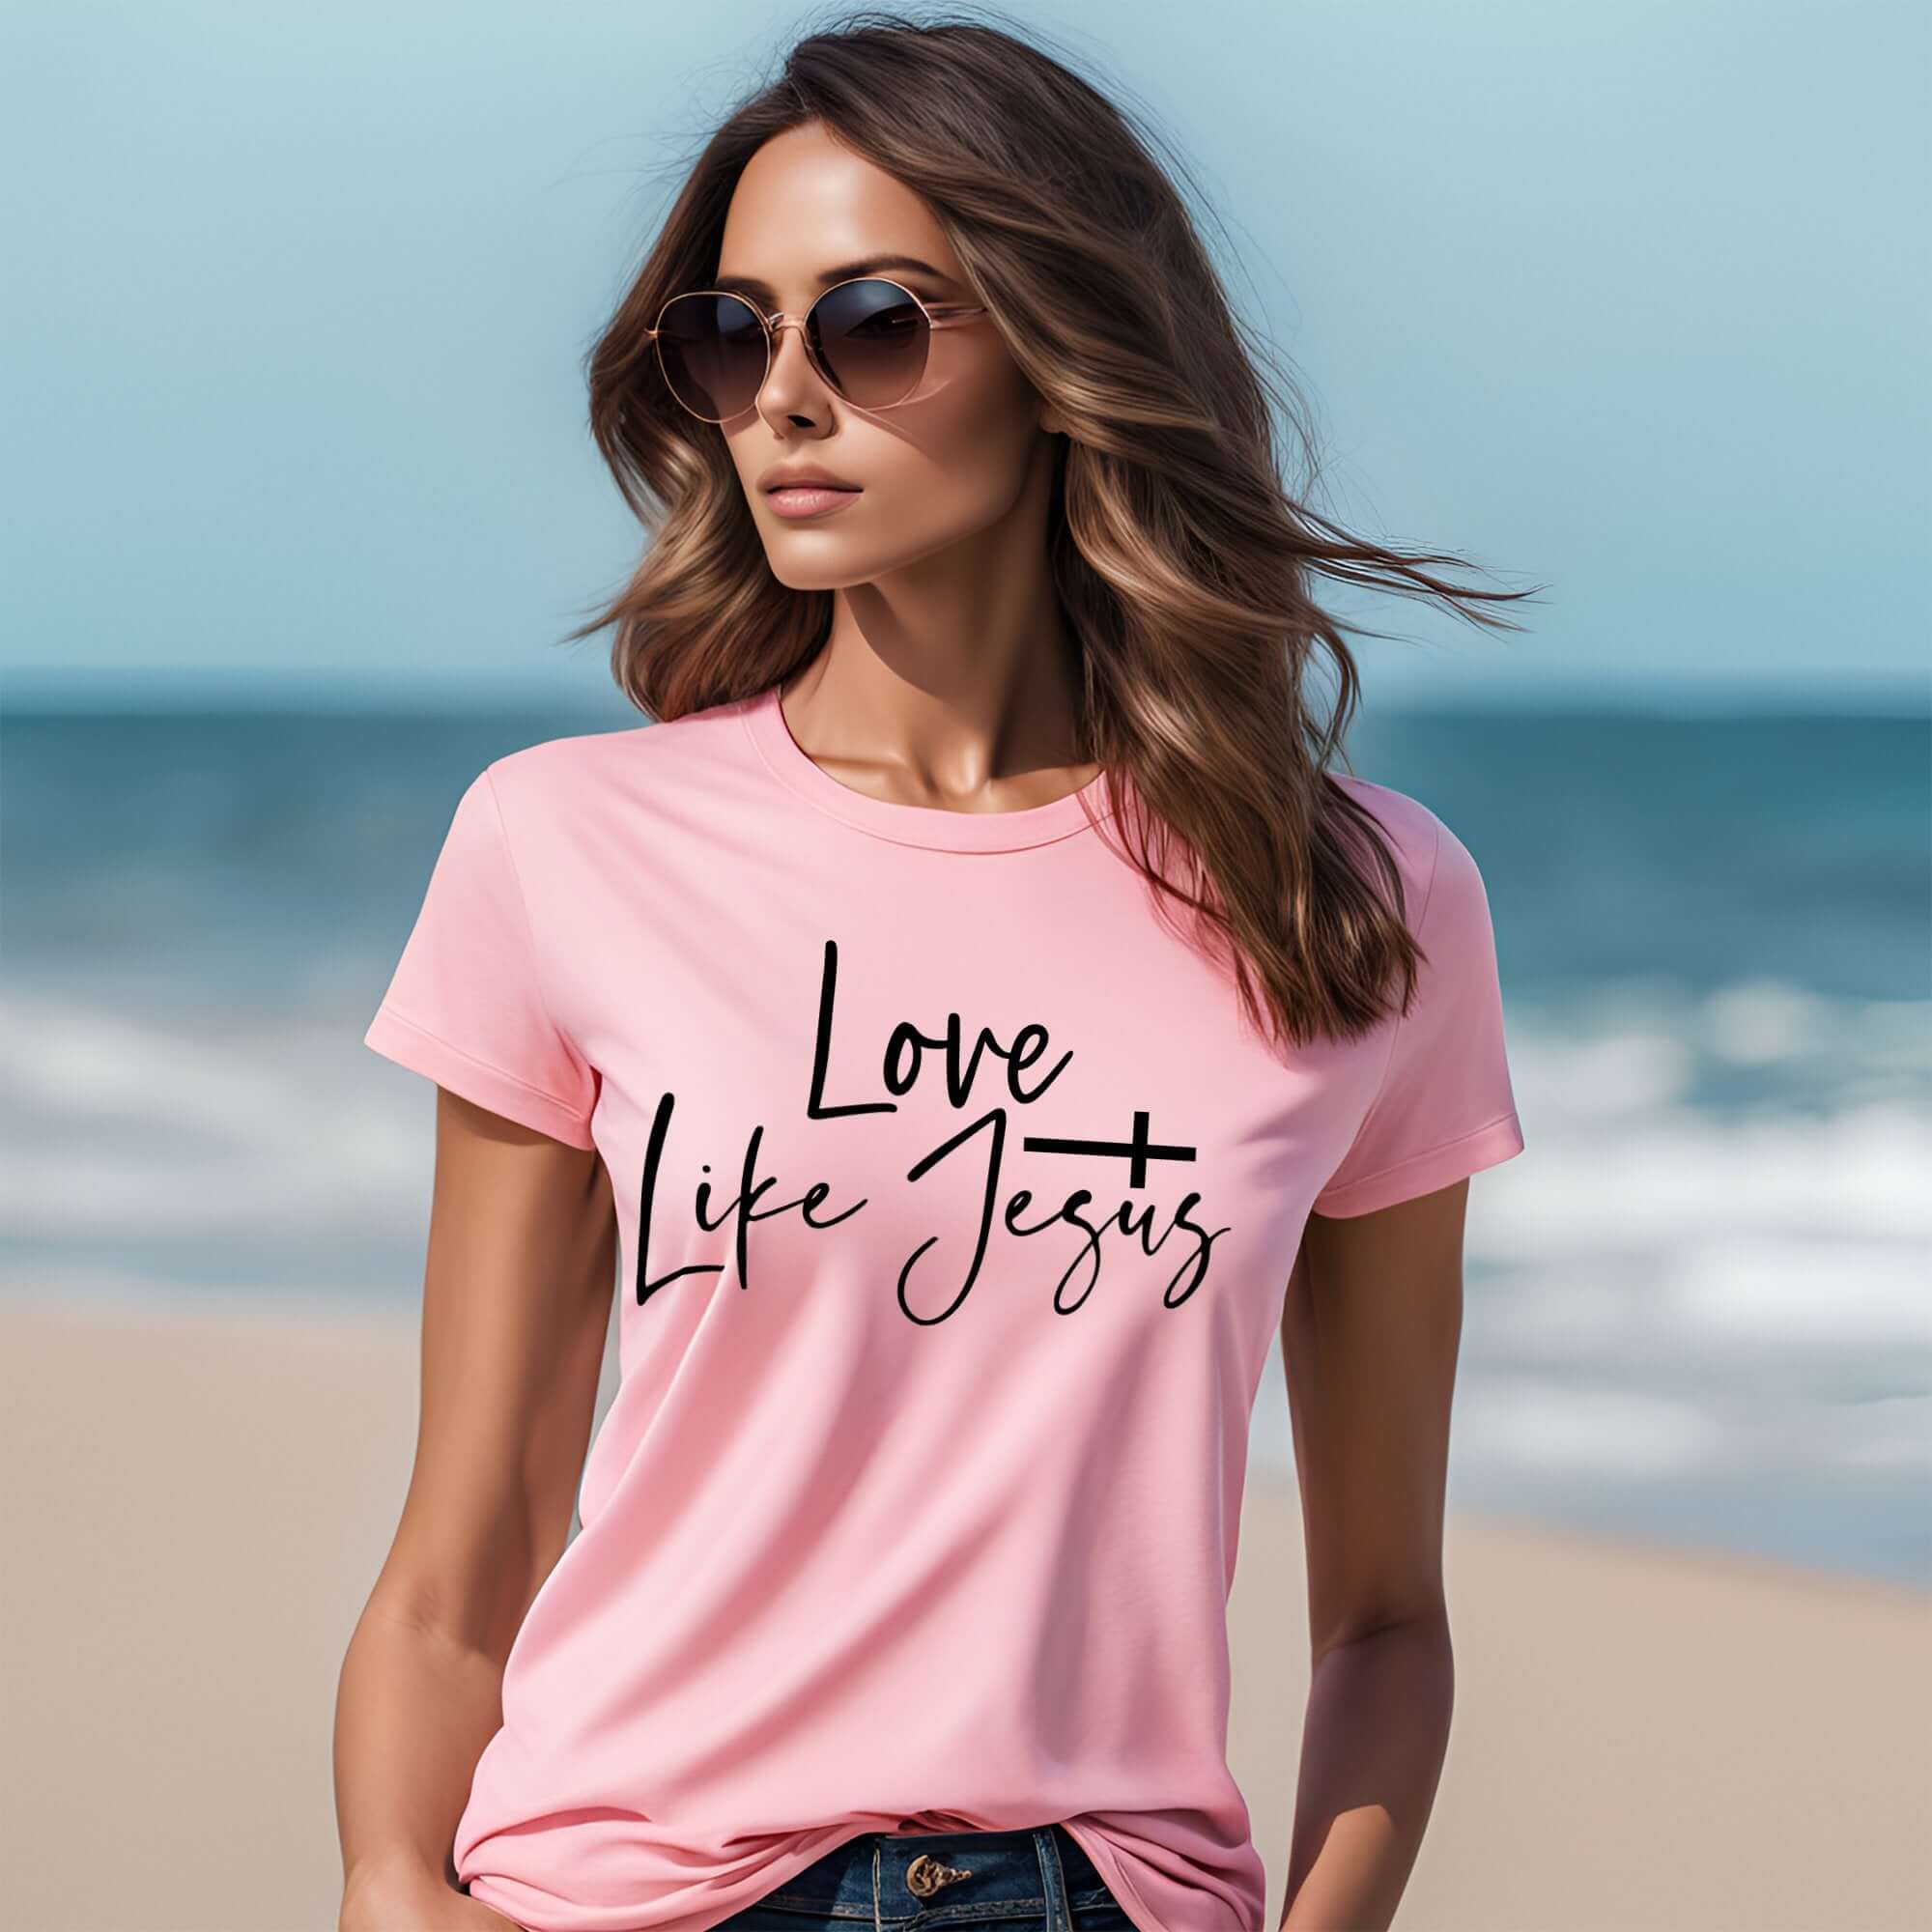 Love Like Jesus Women's Short Sleeve Tee Size: XS Color: Athletic Heather Jesus Passion Apparel